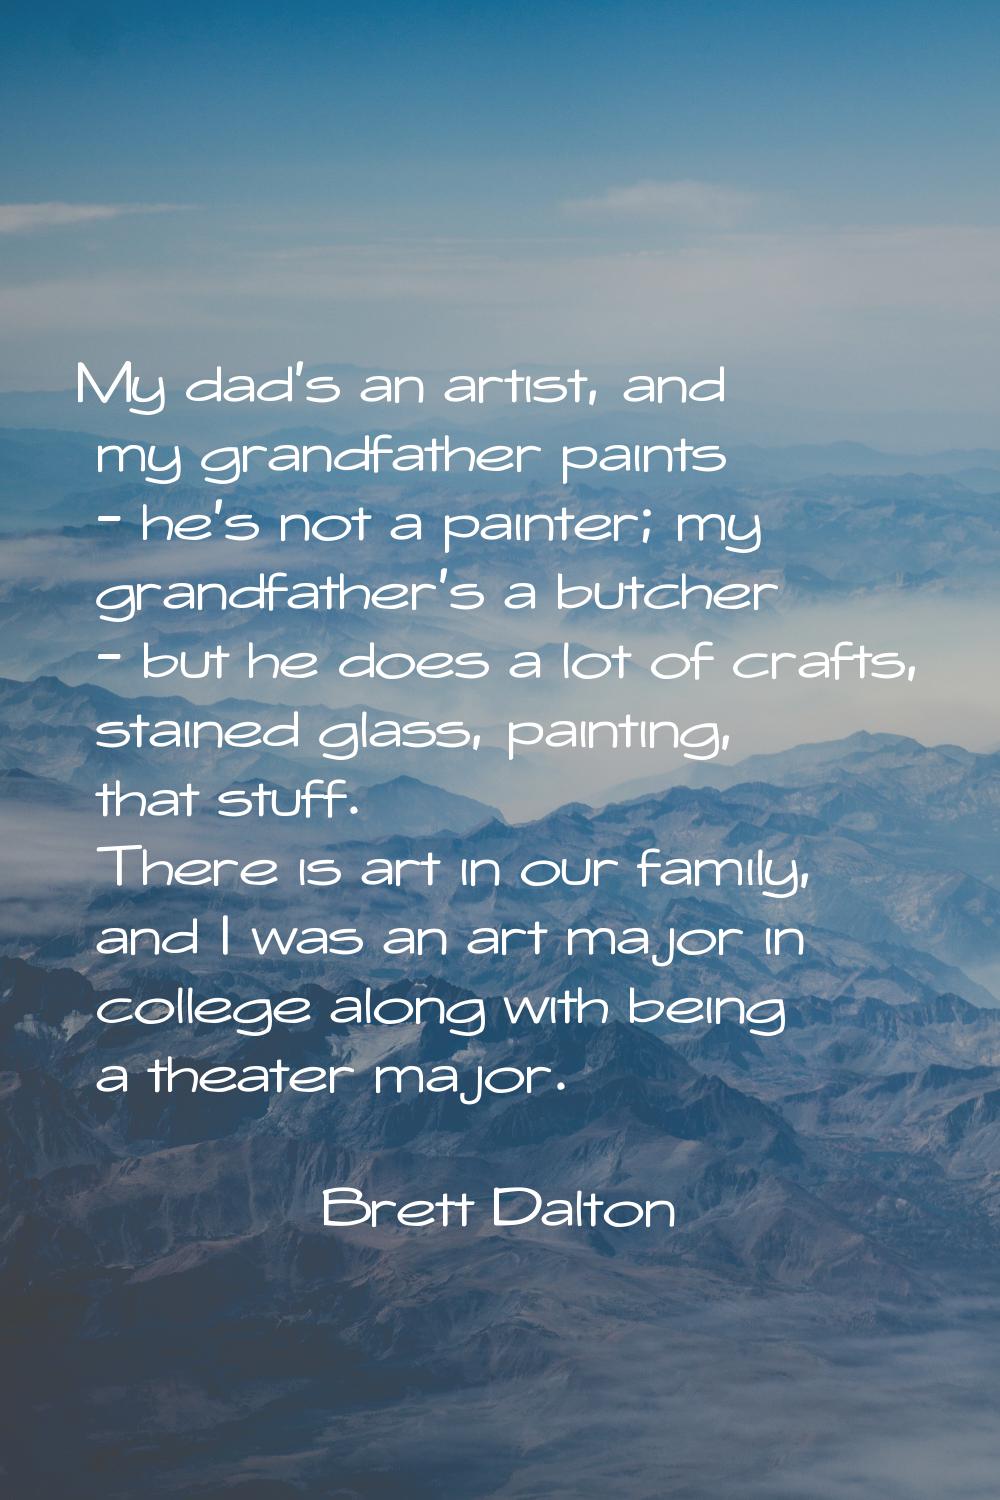 My dad's an artist, and my grandfather paints - he's not a painter; my grandfather's a butcher - bu